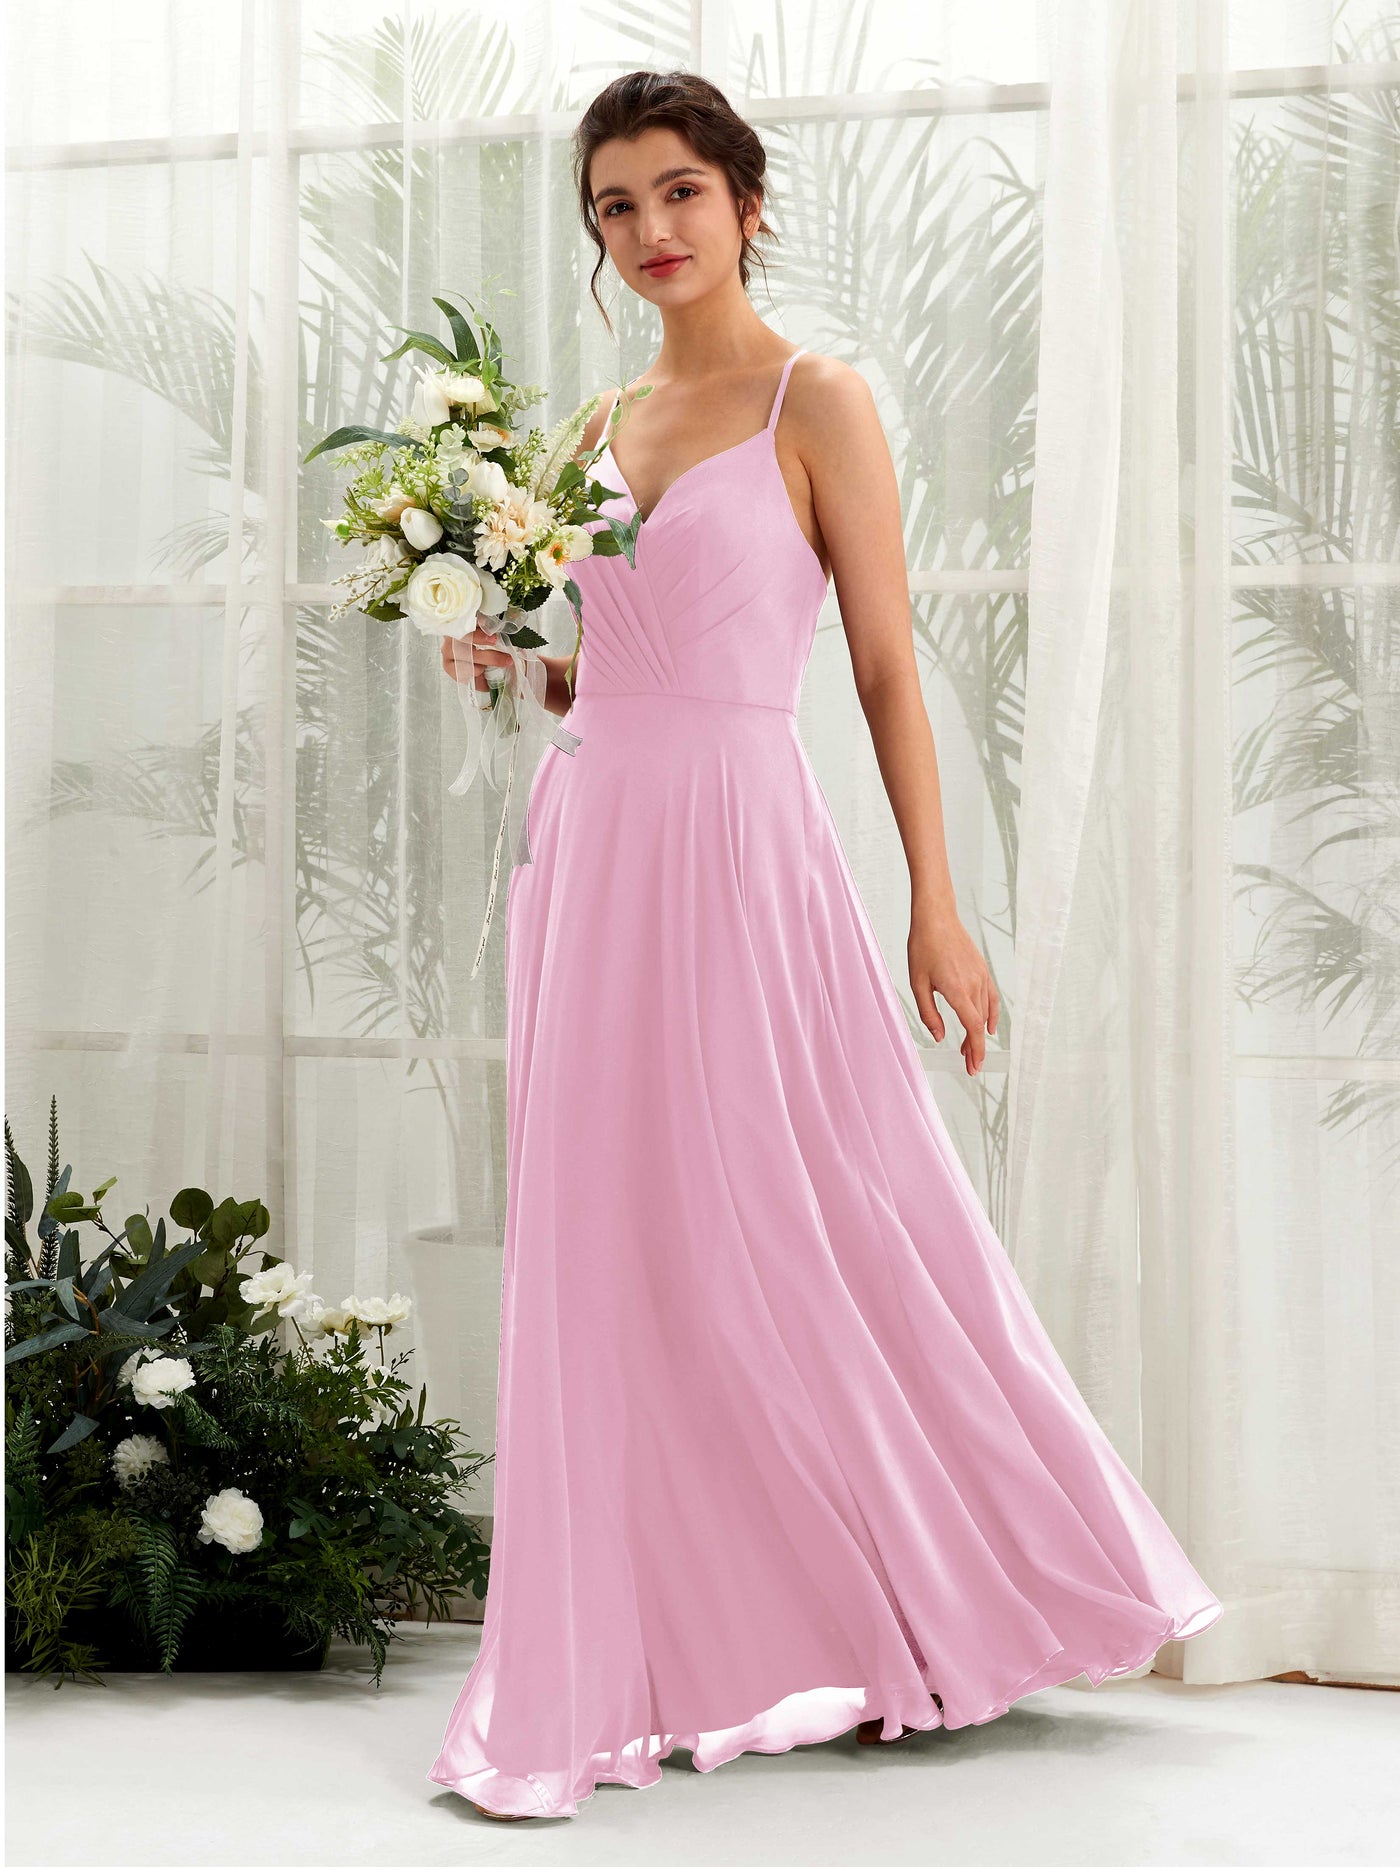 Candy Pink Bridesmaid Dresses Bridesmaid Dress Chiffon Spaghetti-straps Full Length Sleeveless Wedding Party Dress (81224239)#color_candy-pink